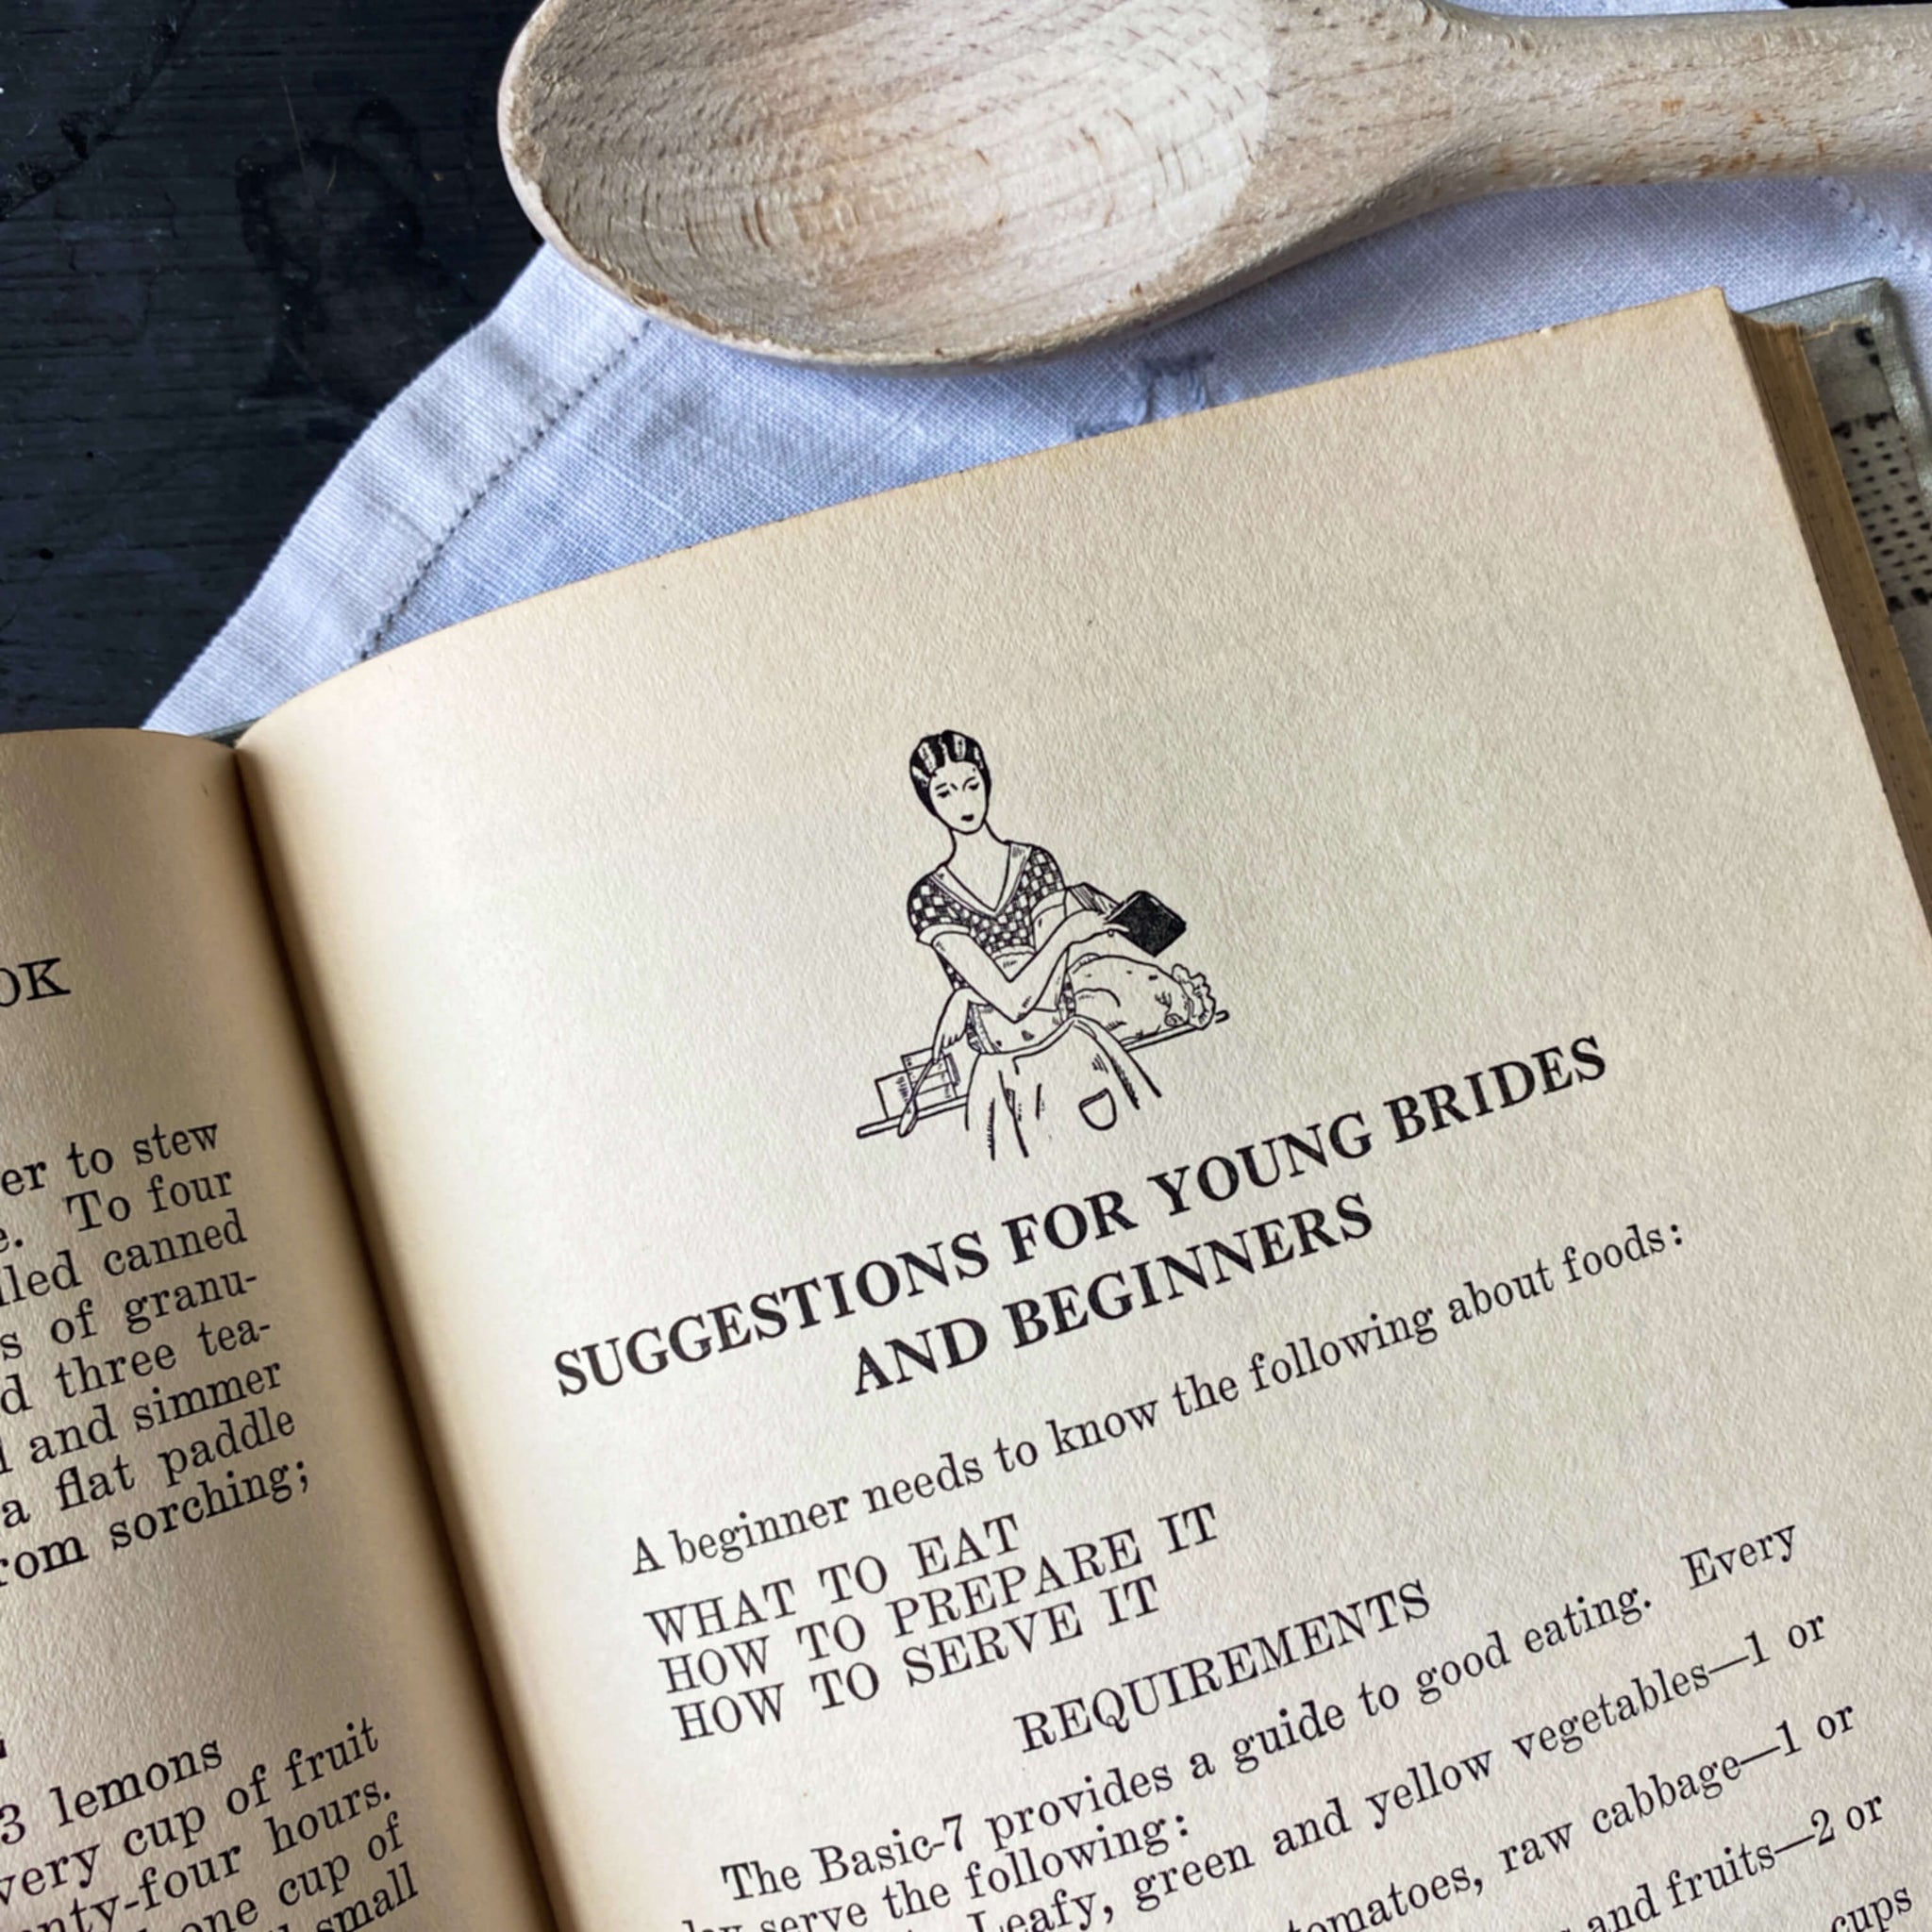 Mary Lyles Wilson's New Cook Book - 1952 Edition